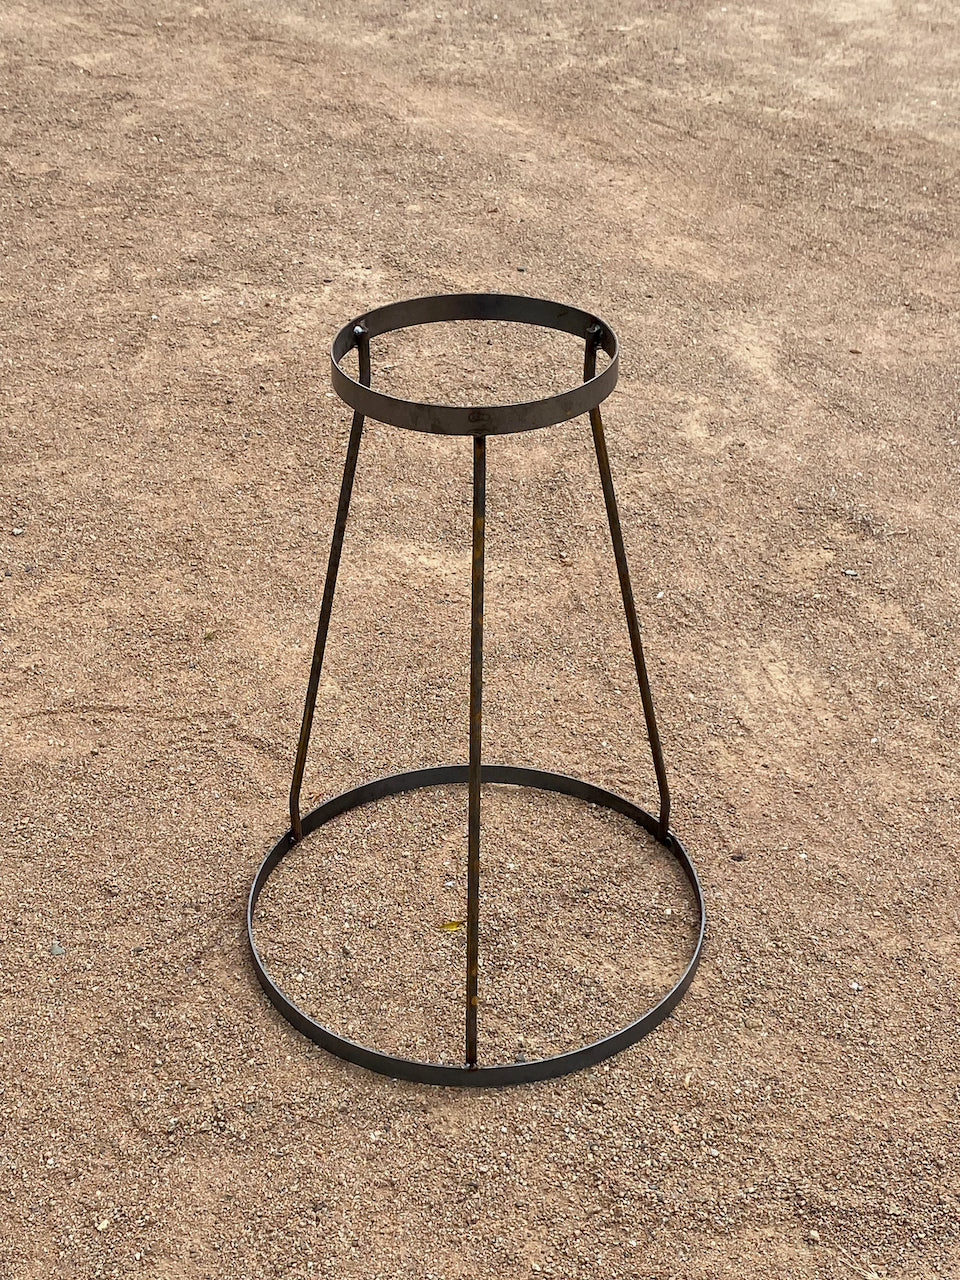 Floating Steel Stand